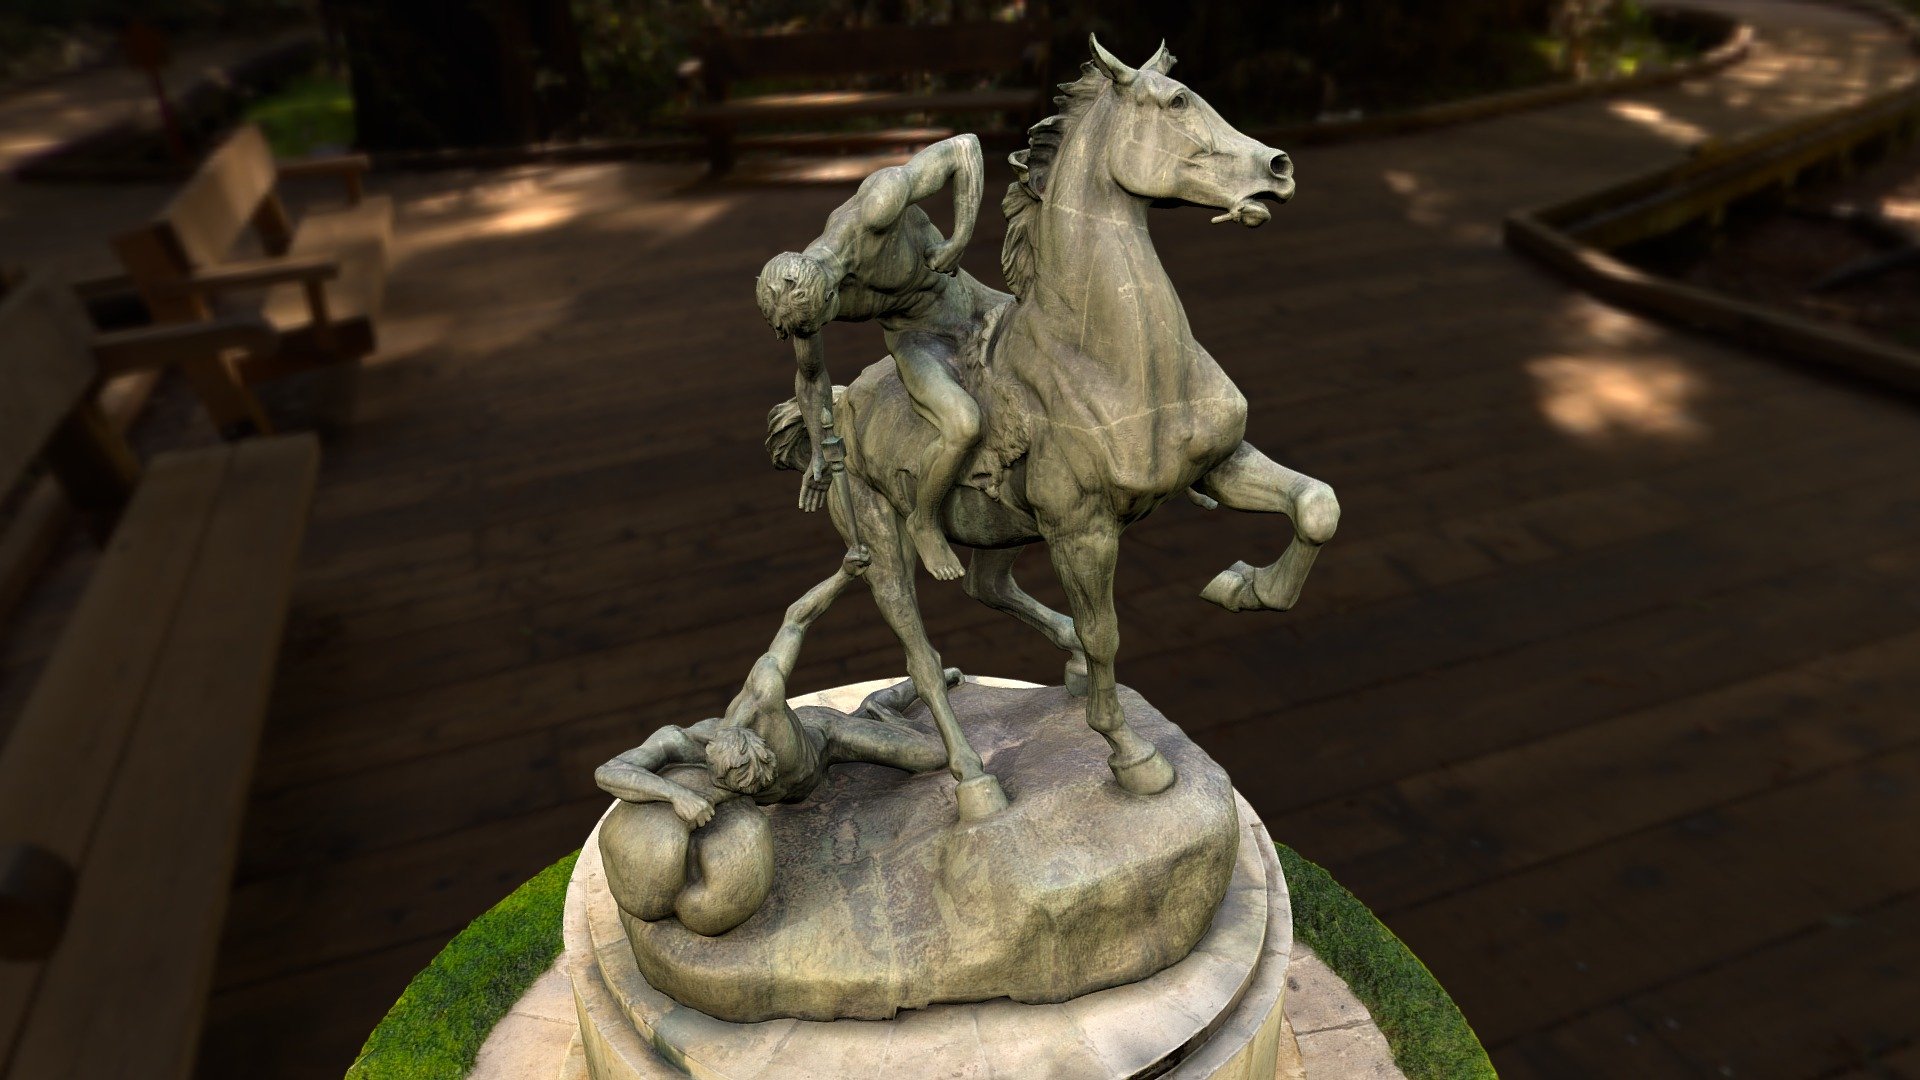 The Torch-Bearers is a sculpture by Anna Hyatt Huntington created in 1955. This sculpture shows a dying man, giving a torch, symbol of knowledge, to a young man on a horse, thus symbolizing the transmission of western culture and civilization through history. 

Find out more at https://www.soulbank.com/scene/309/the-torchbearers-valencia-spain - The Torchbearers, Valencia Spain - 3D model by Soulbank 3d model